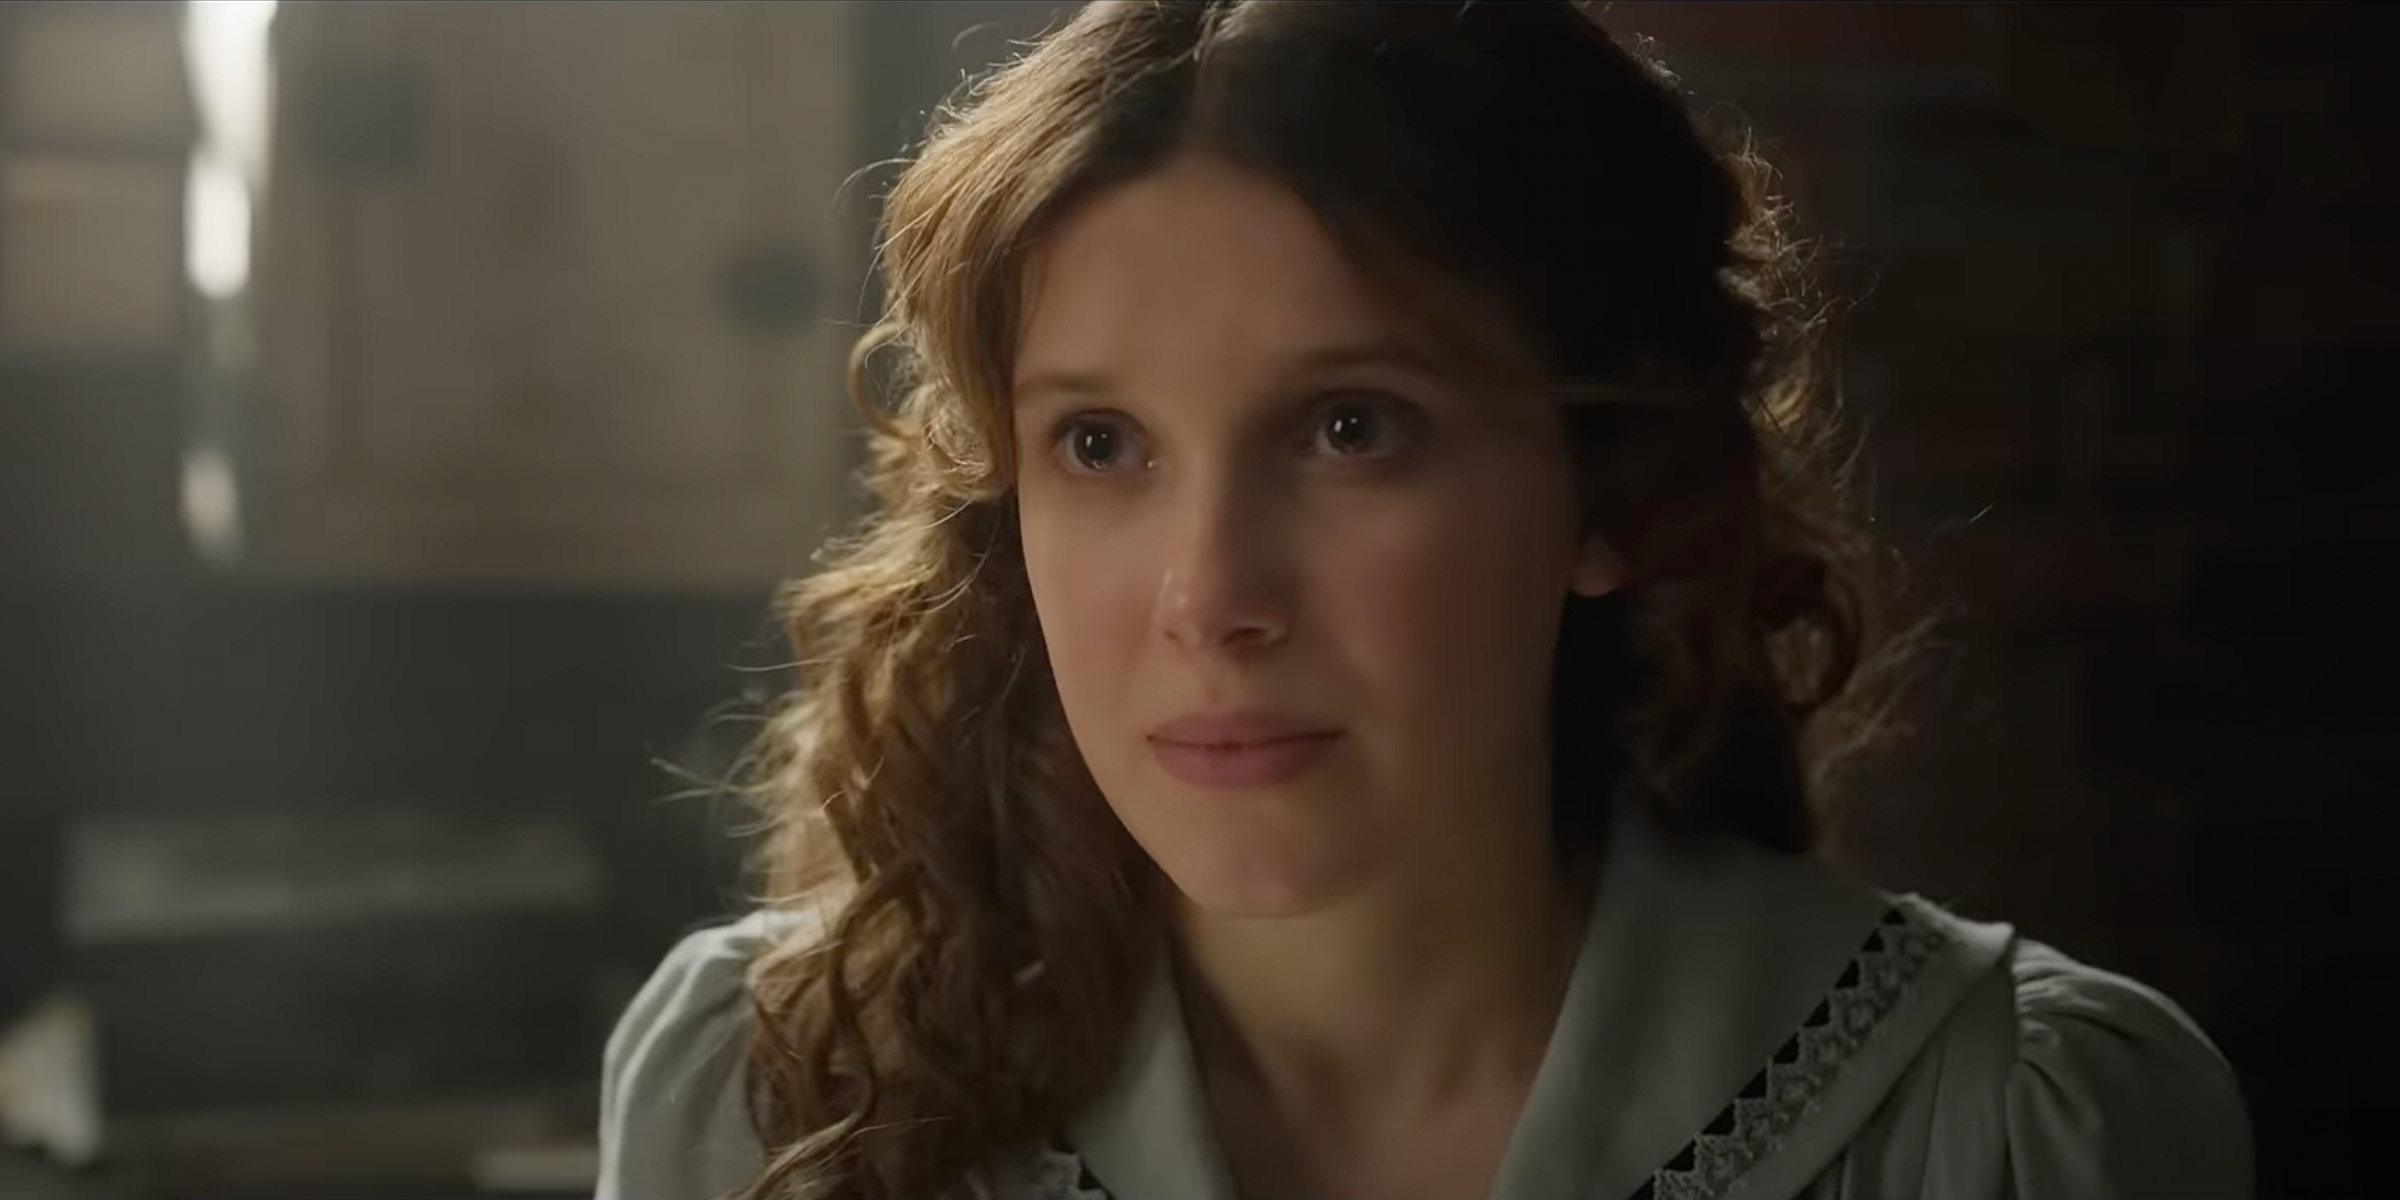 Enola Holmes 2 Trailer Sees Millie Bobby Brown And Henry Cavill Return